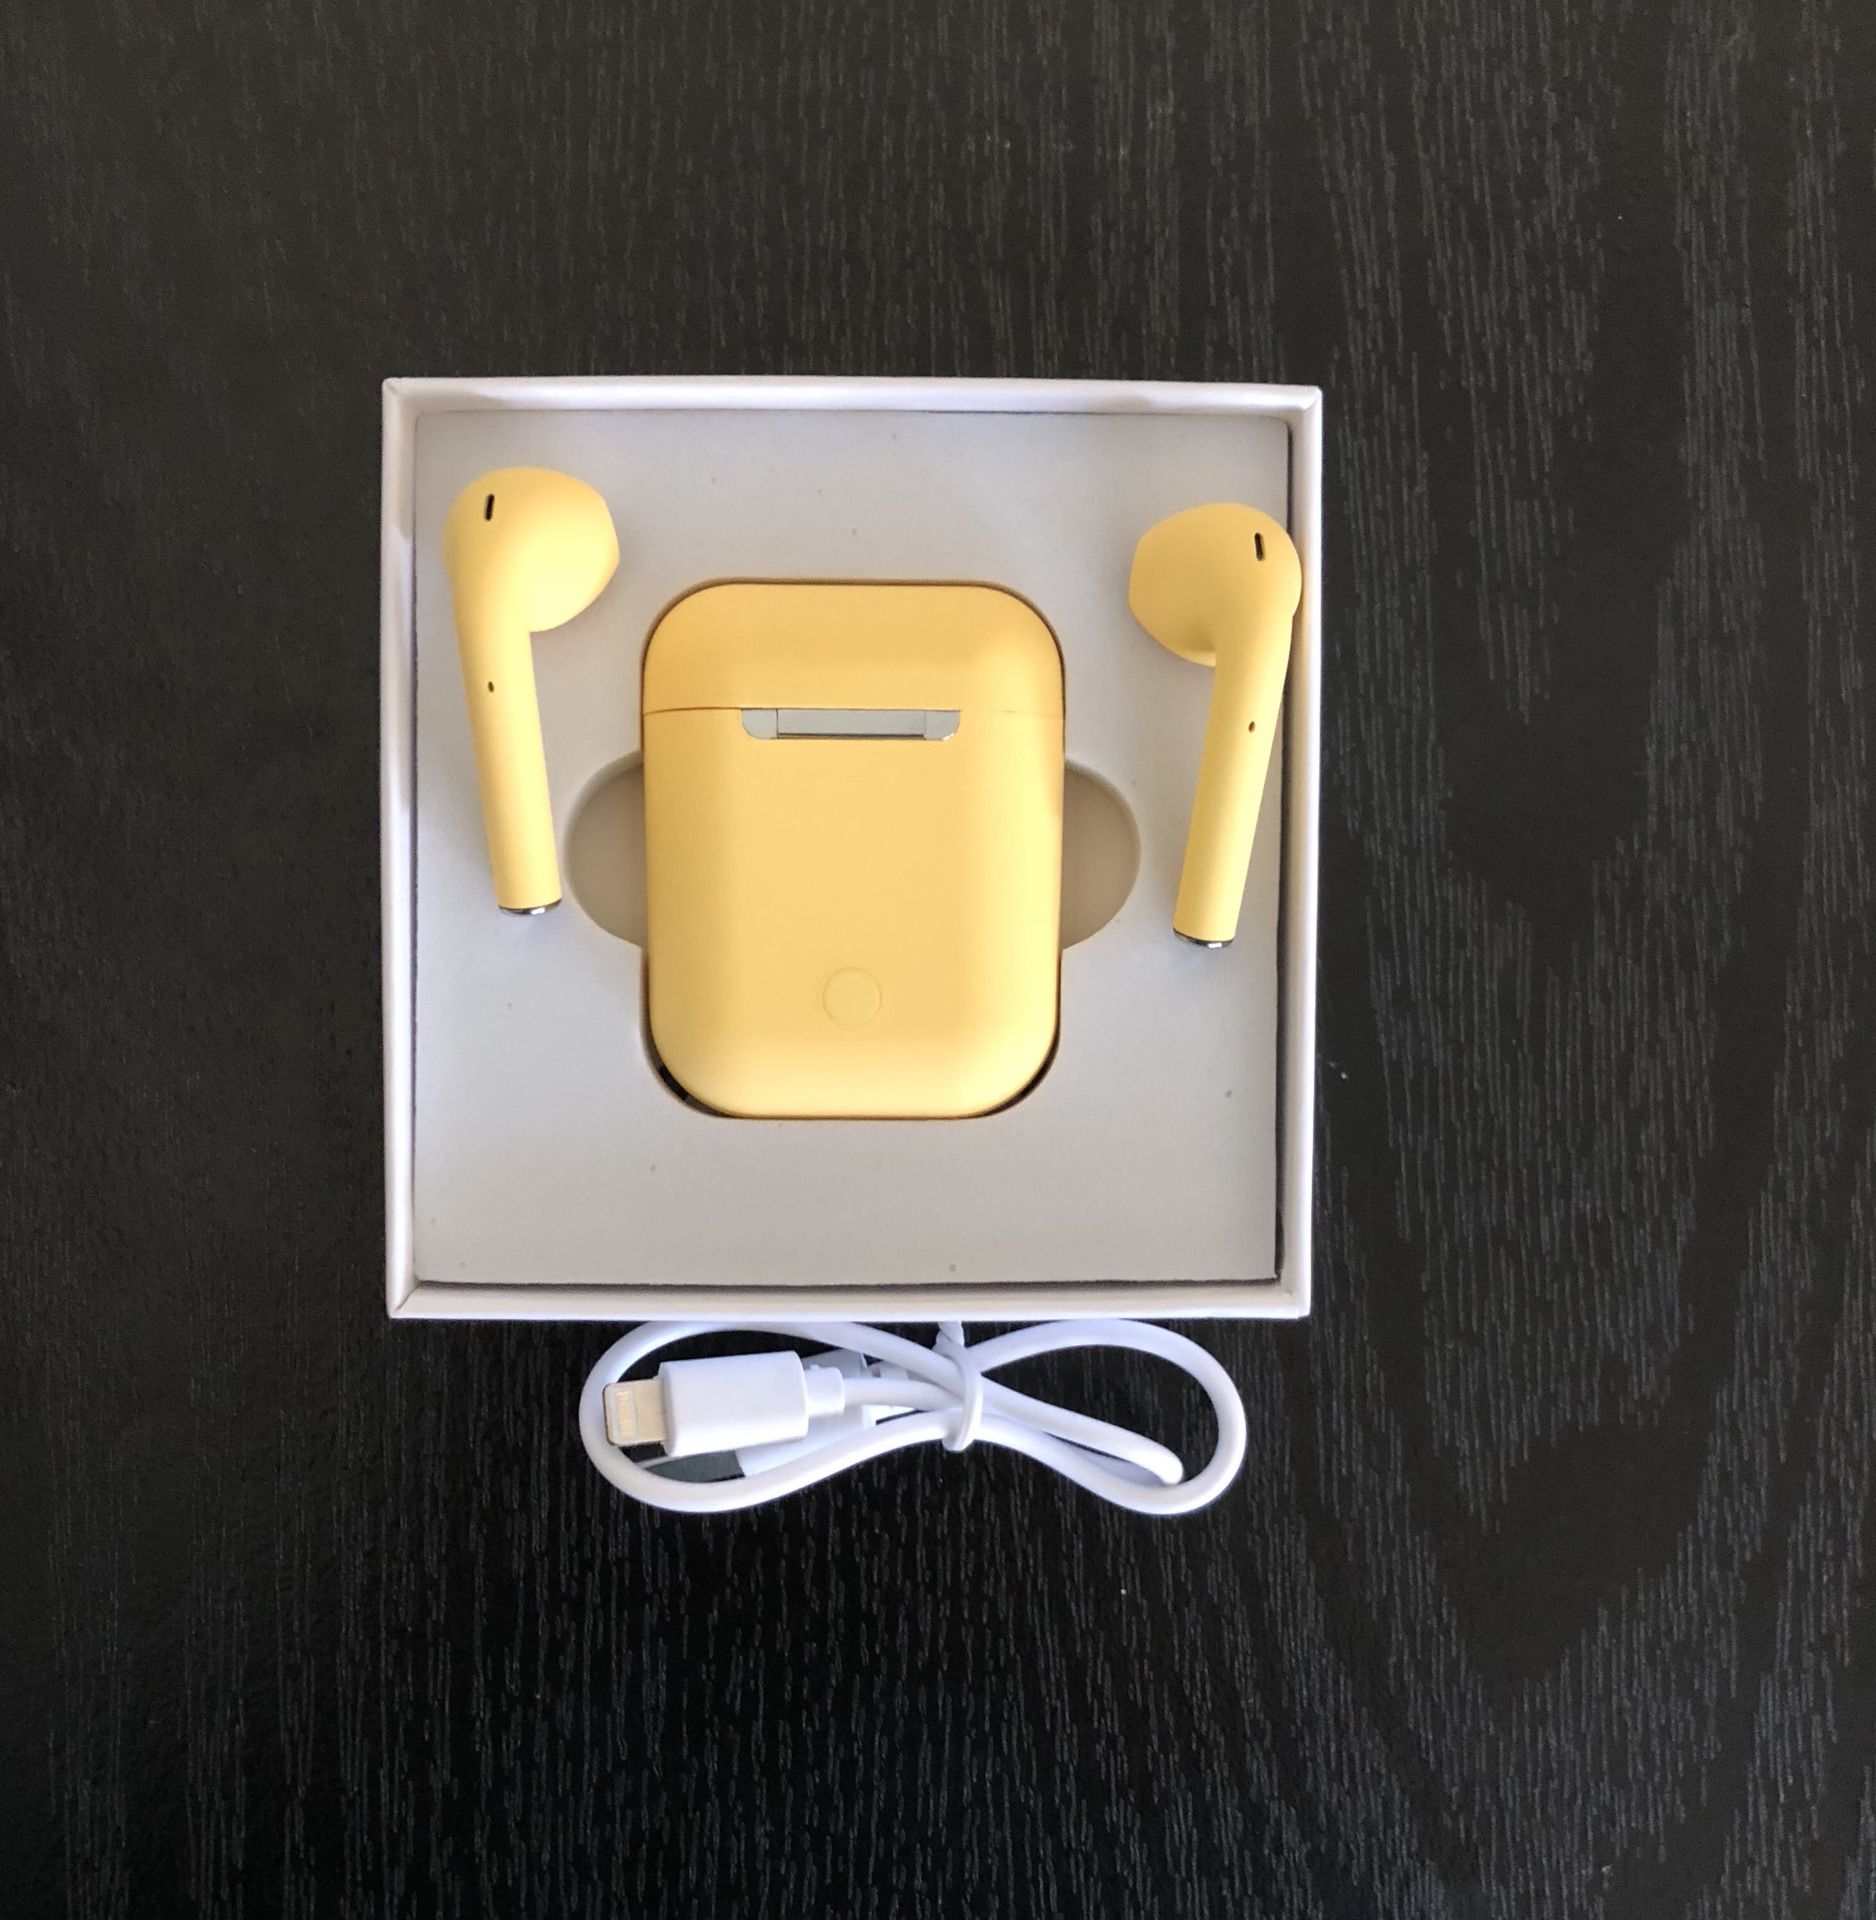 Bluetooth Wireless Earpods Earbuds Earphone APPLE AirPods IPHONE 6 7 8 X XR XS 11 MAX PRO Plus Android Yellow